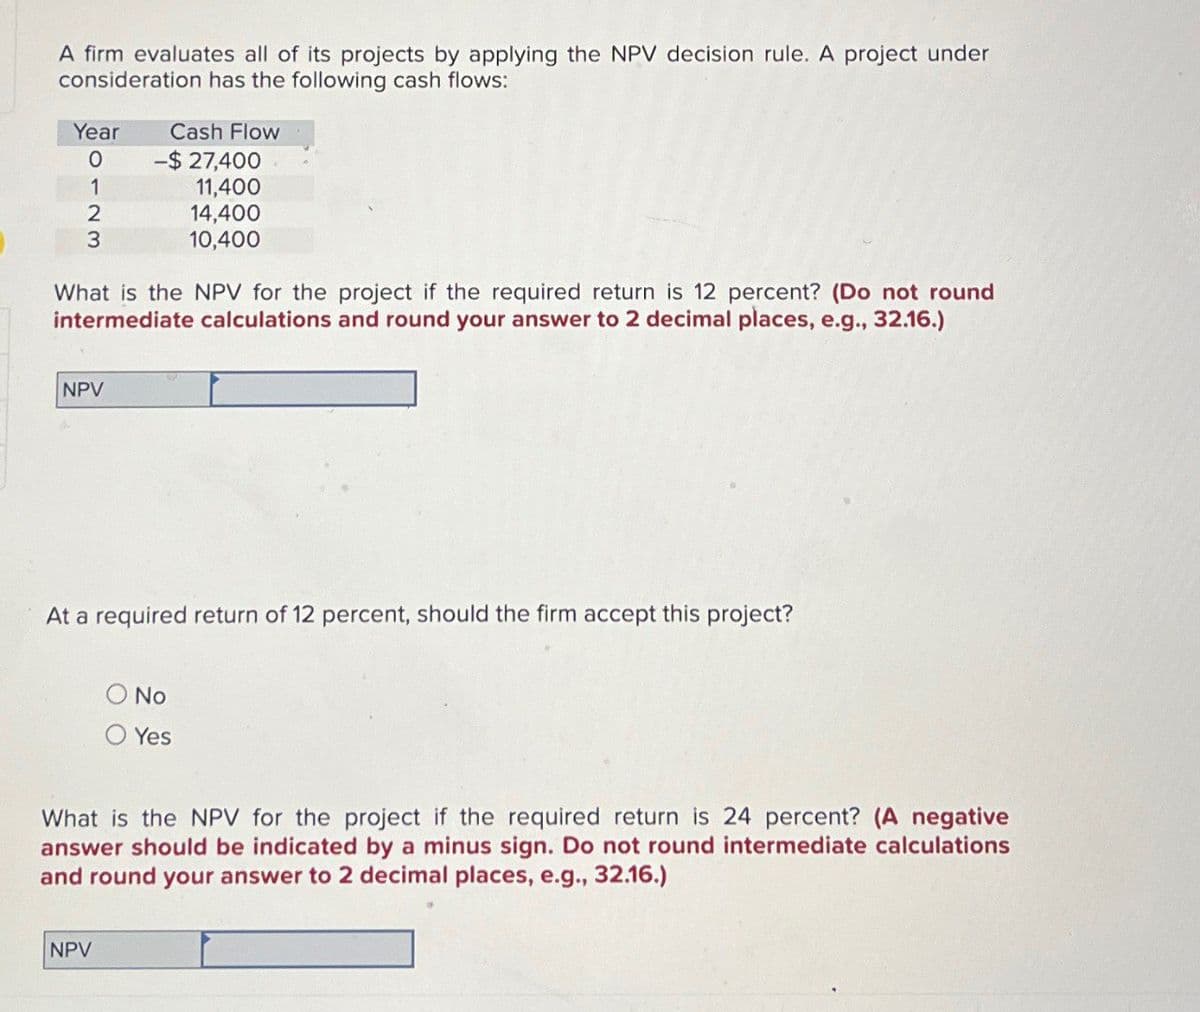 A firm evaluates all of its projects by applying the NPV decision rule. A project under
consideration has the following cash flows:
Year
Cash Flow
0
-$ 27,400
1
11,400
2
3
14,400
10,400
What is the NPV for the project if the required return is 12 percent? (Do not round
intermediate calculations and round your answer to 2 decimal places, e.g., 32.16.)
NPV
At a required return of 12 percent, should the firm accept this project?
No
Yes
What is the NPV for the project if the required return is 24 percent? (A negative
answer should be indicated by a minus sign. Do not round intermediate calculations
and round your answer to 2 decimal places, e.g., 32.16.)
NPV